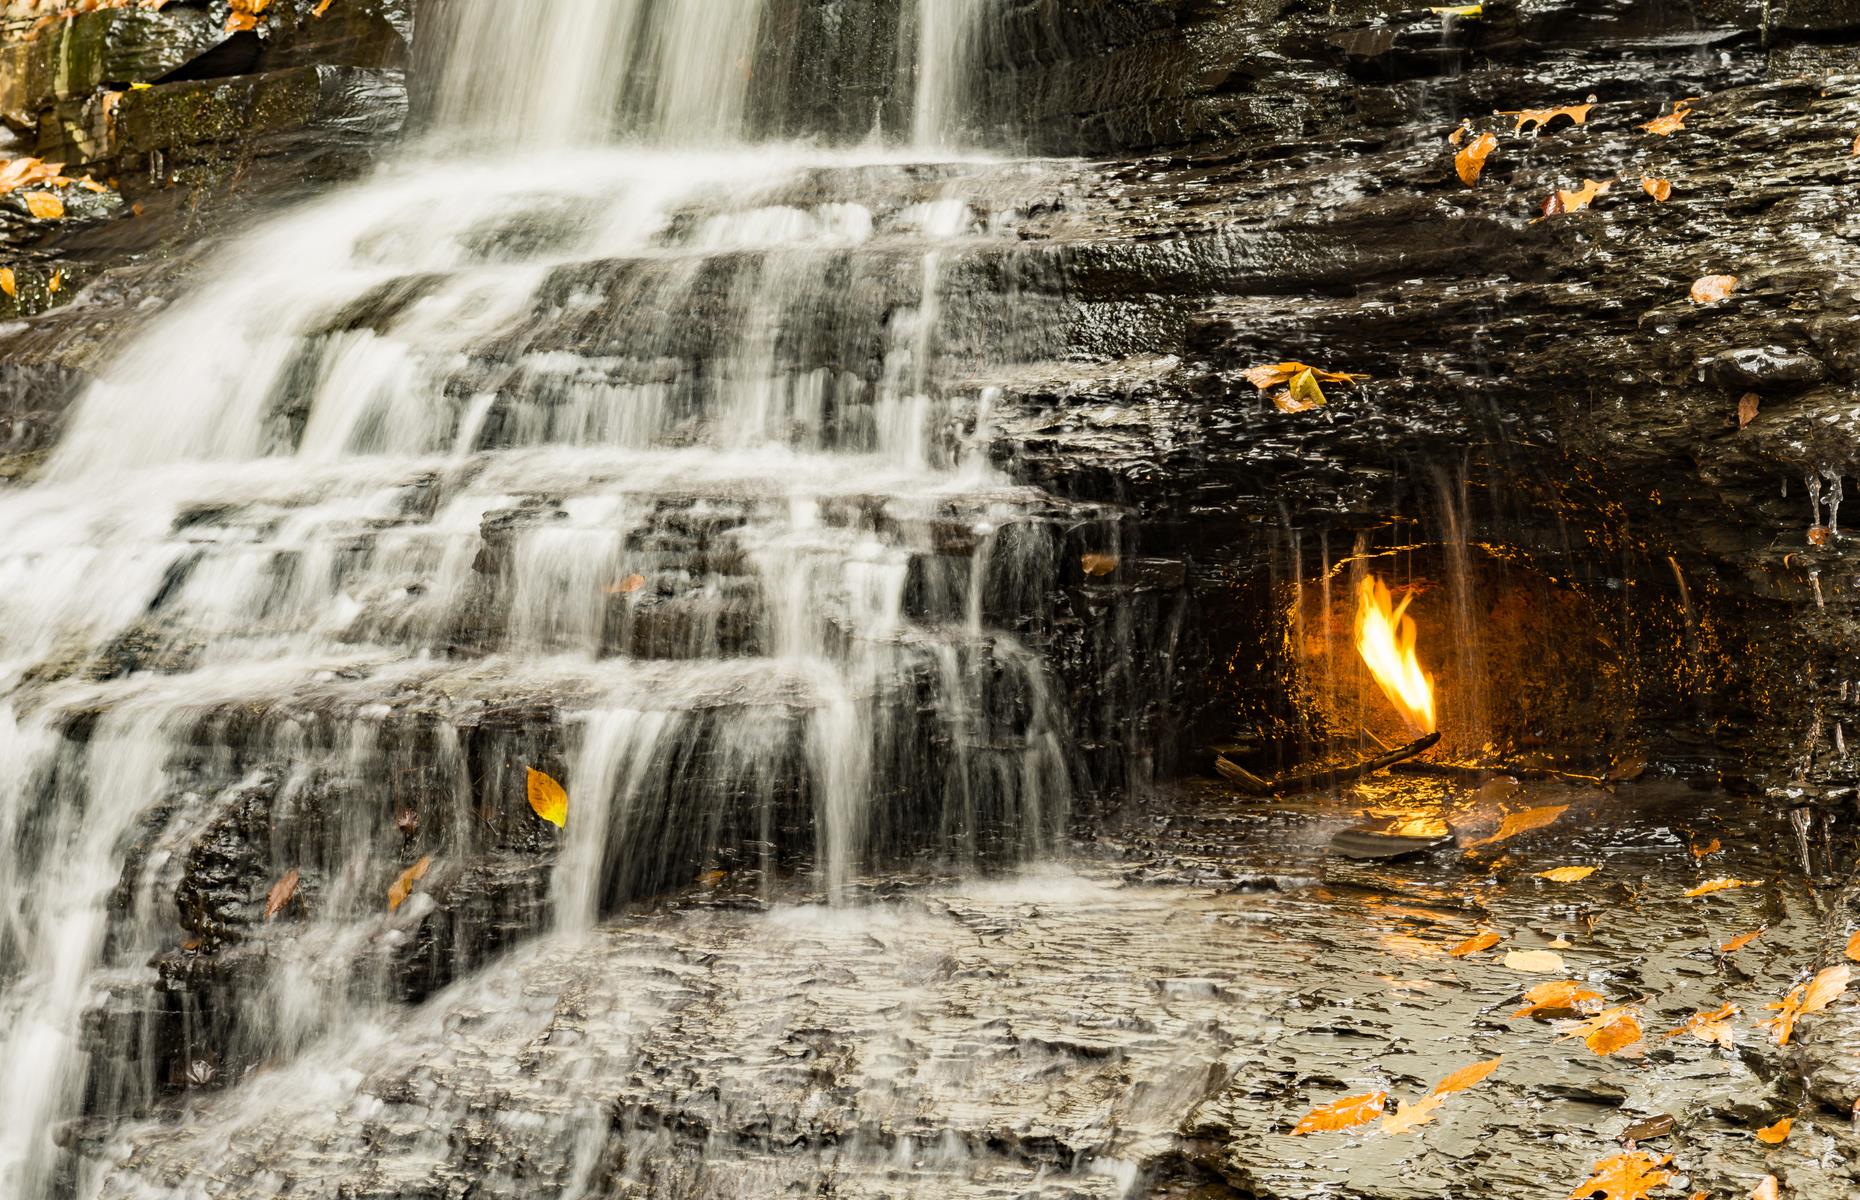 These fiery falls would be a jaw-dropping sight wherever in the world you found them. They're actually located in Chestnut Ridge Park and an "eternal flame" flickers mysteriously beneath the rushing water. The fire is rumored to have been lit many thousands of years ago by Native Americans, and a little grotto below the waterfall emits natural gases that keep the flame alight. Visitors can reach it via a moderate hiking trail a little over a mile (1.6km) long.